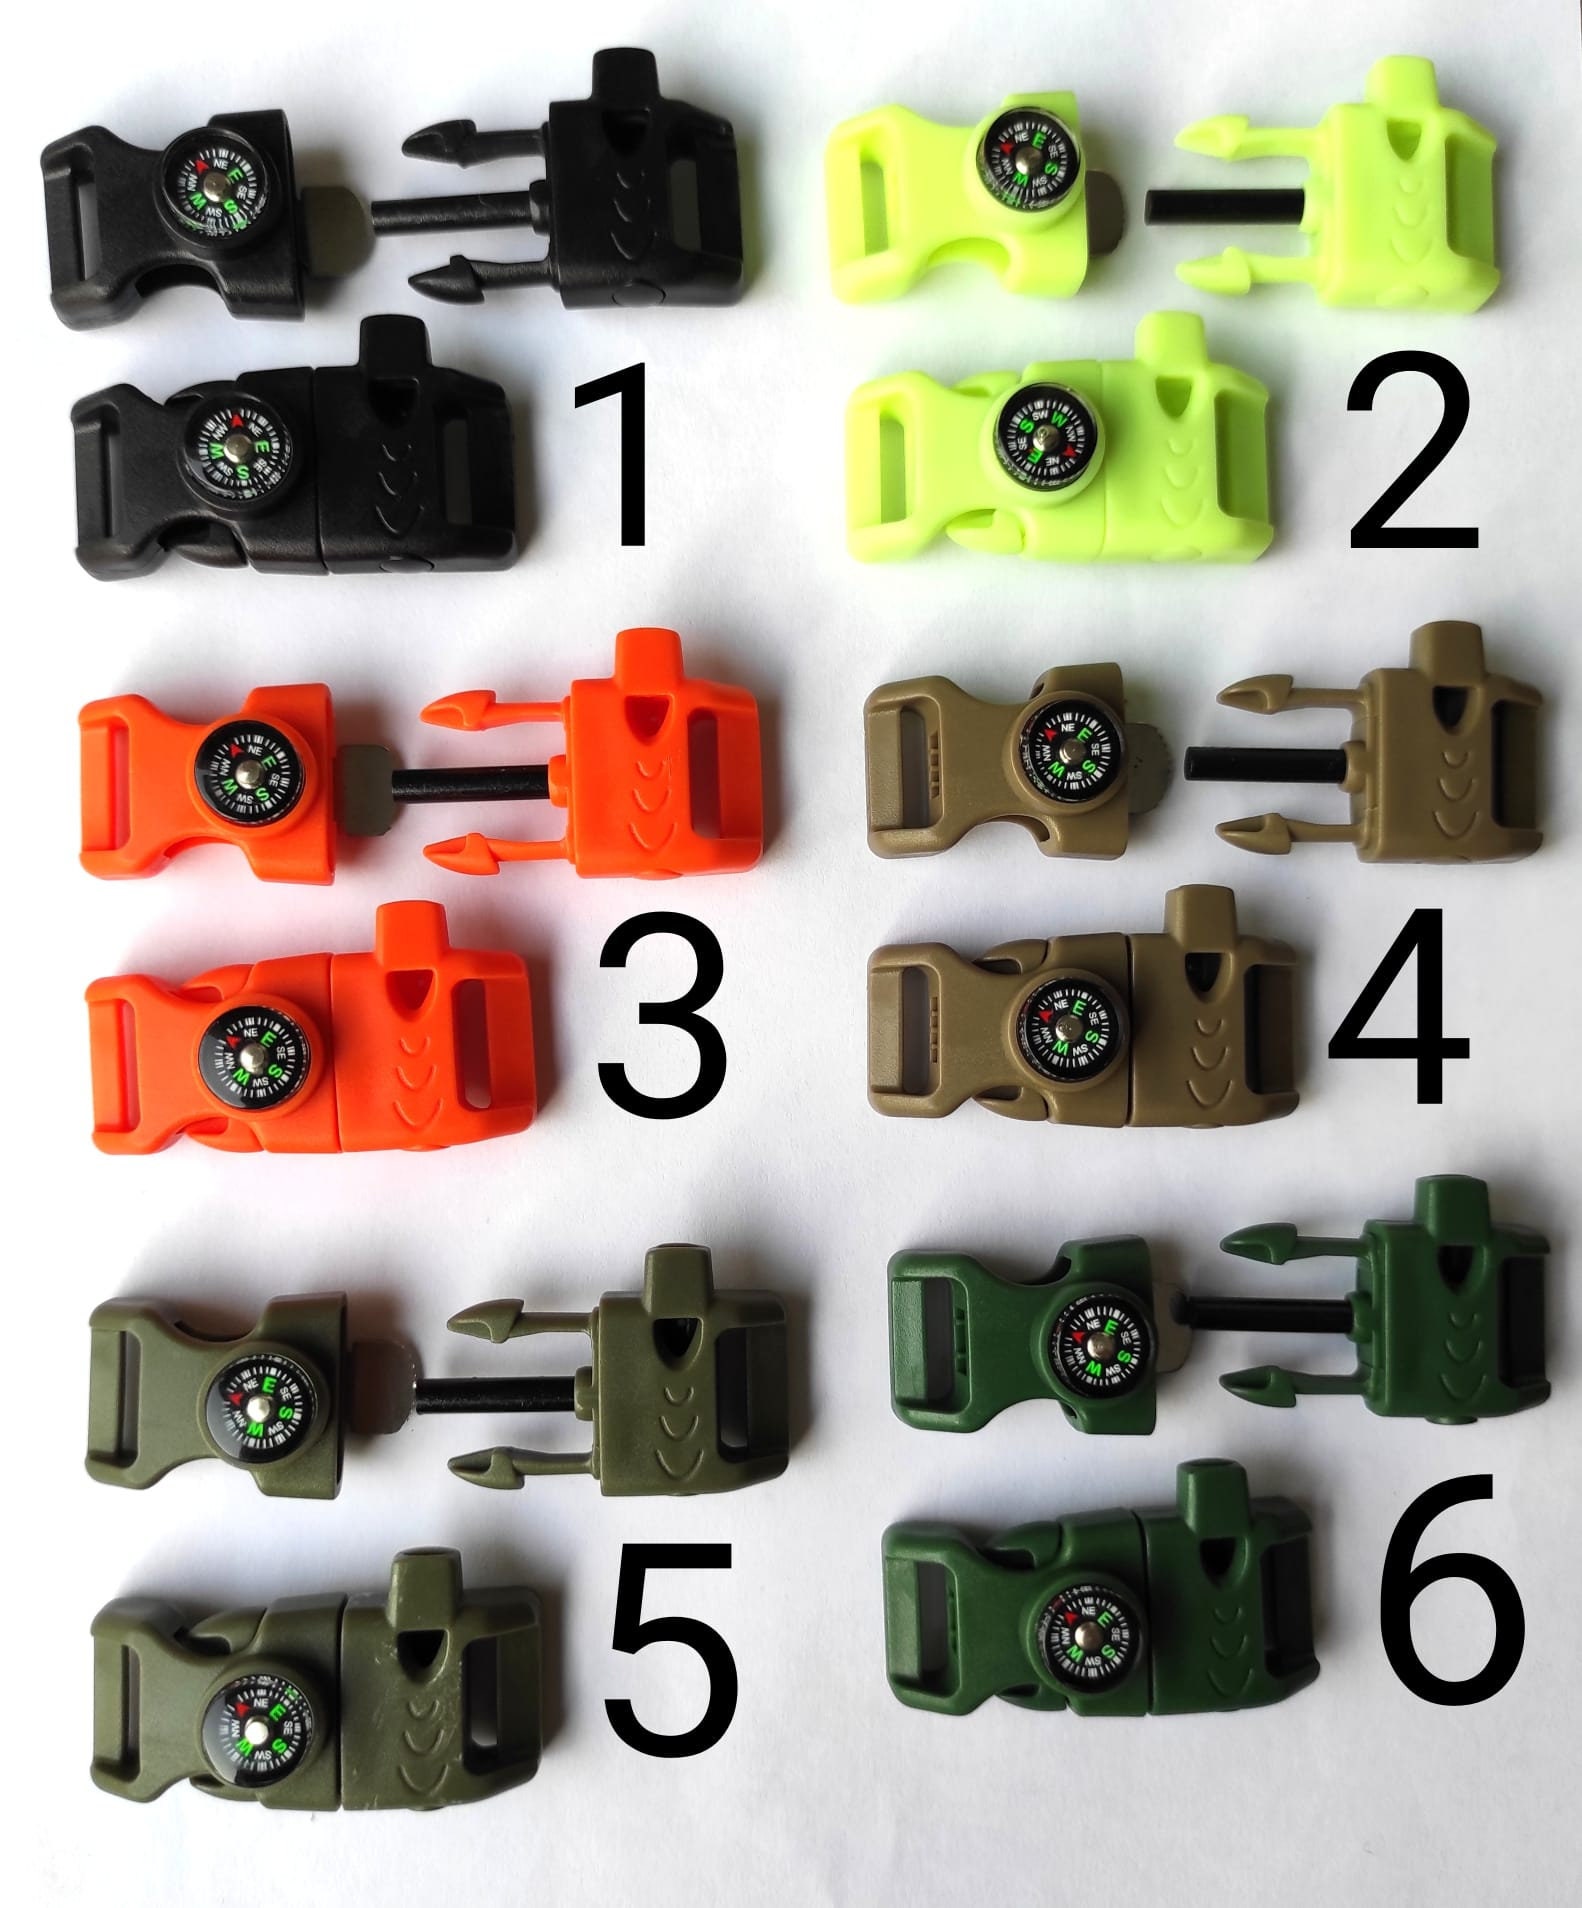 2/4/8pcs High Quality 550 Paracords Outdoor Curved Emergency Tool Side  Release Buckle Survival Whistle Buckles Paracord Accessories Bracelet Strap  8PCS STYLE 2 